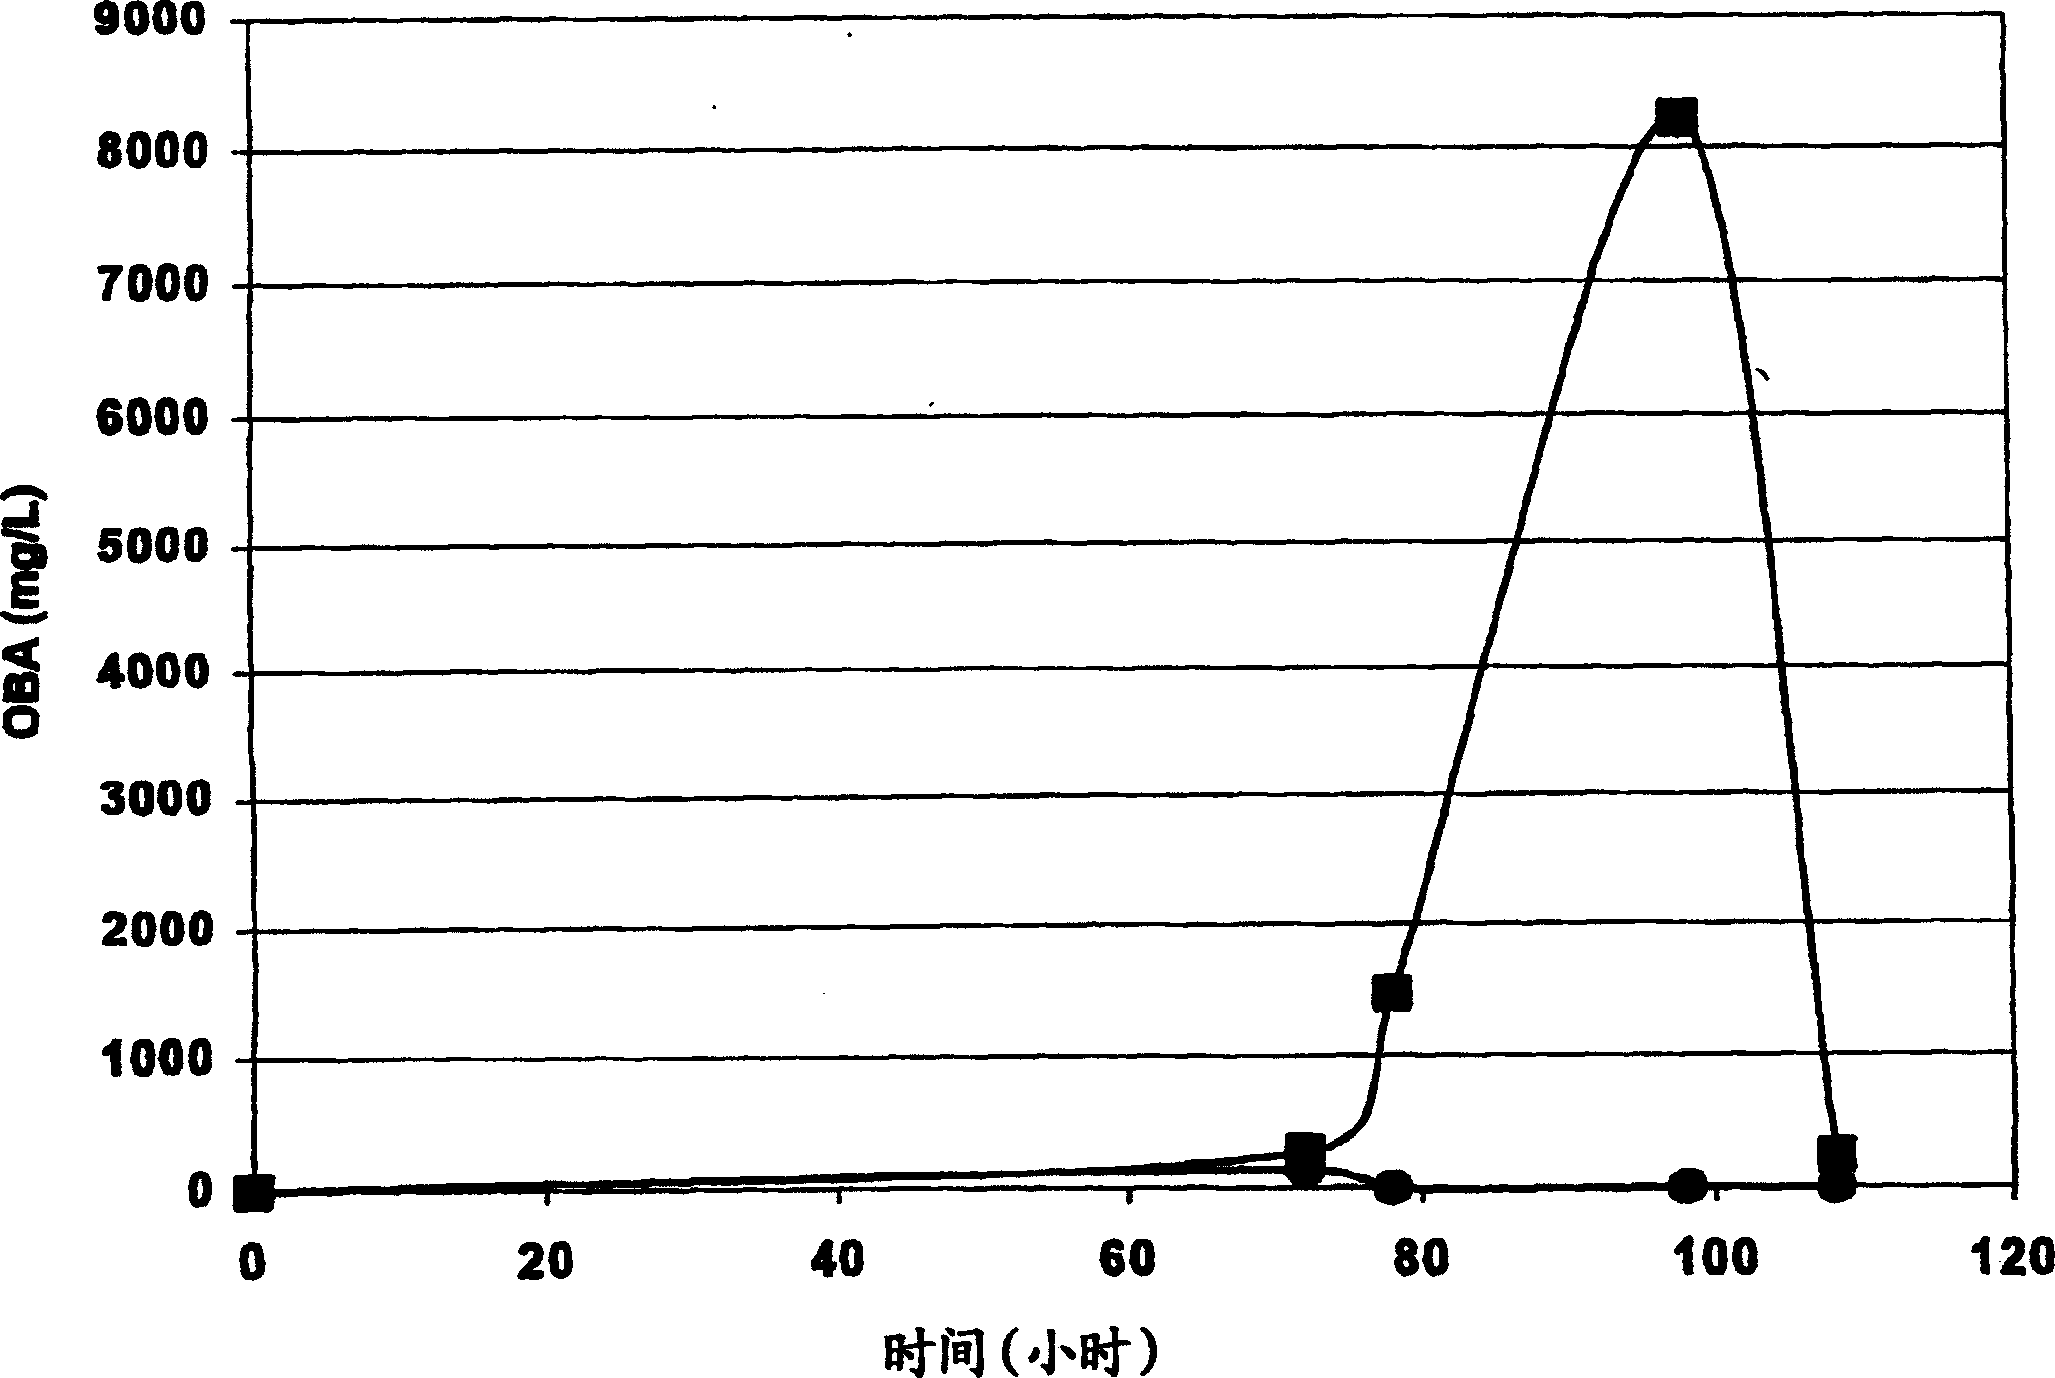 Production of alpha-keto butyrate